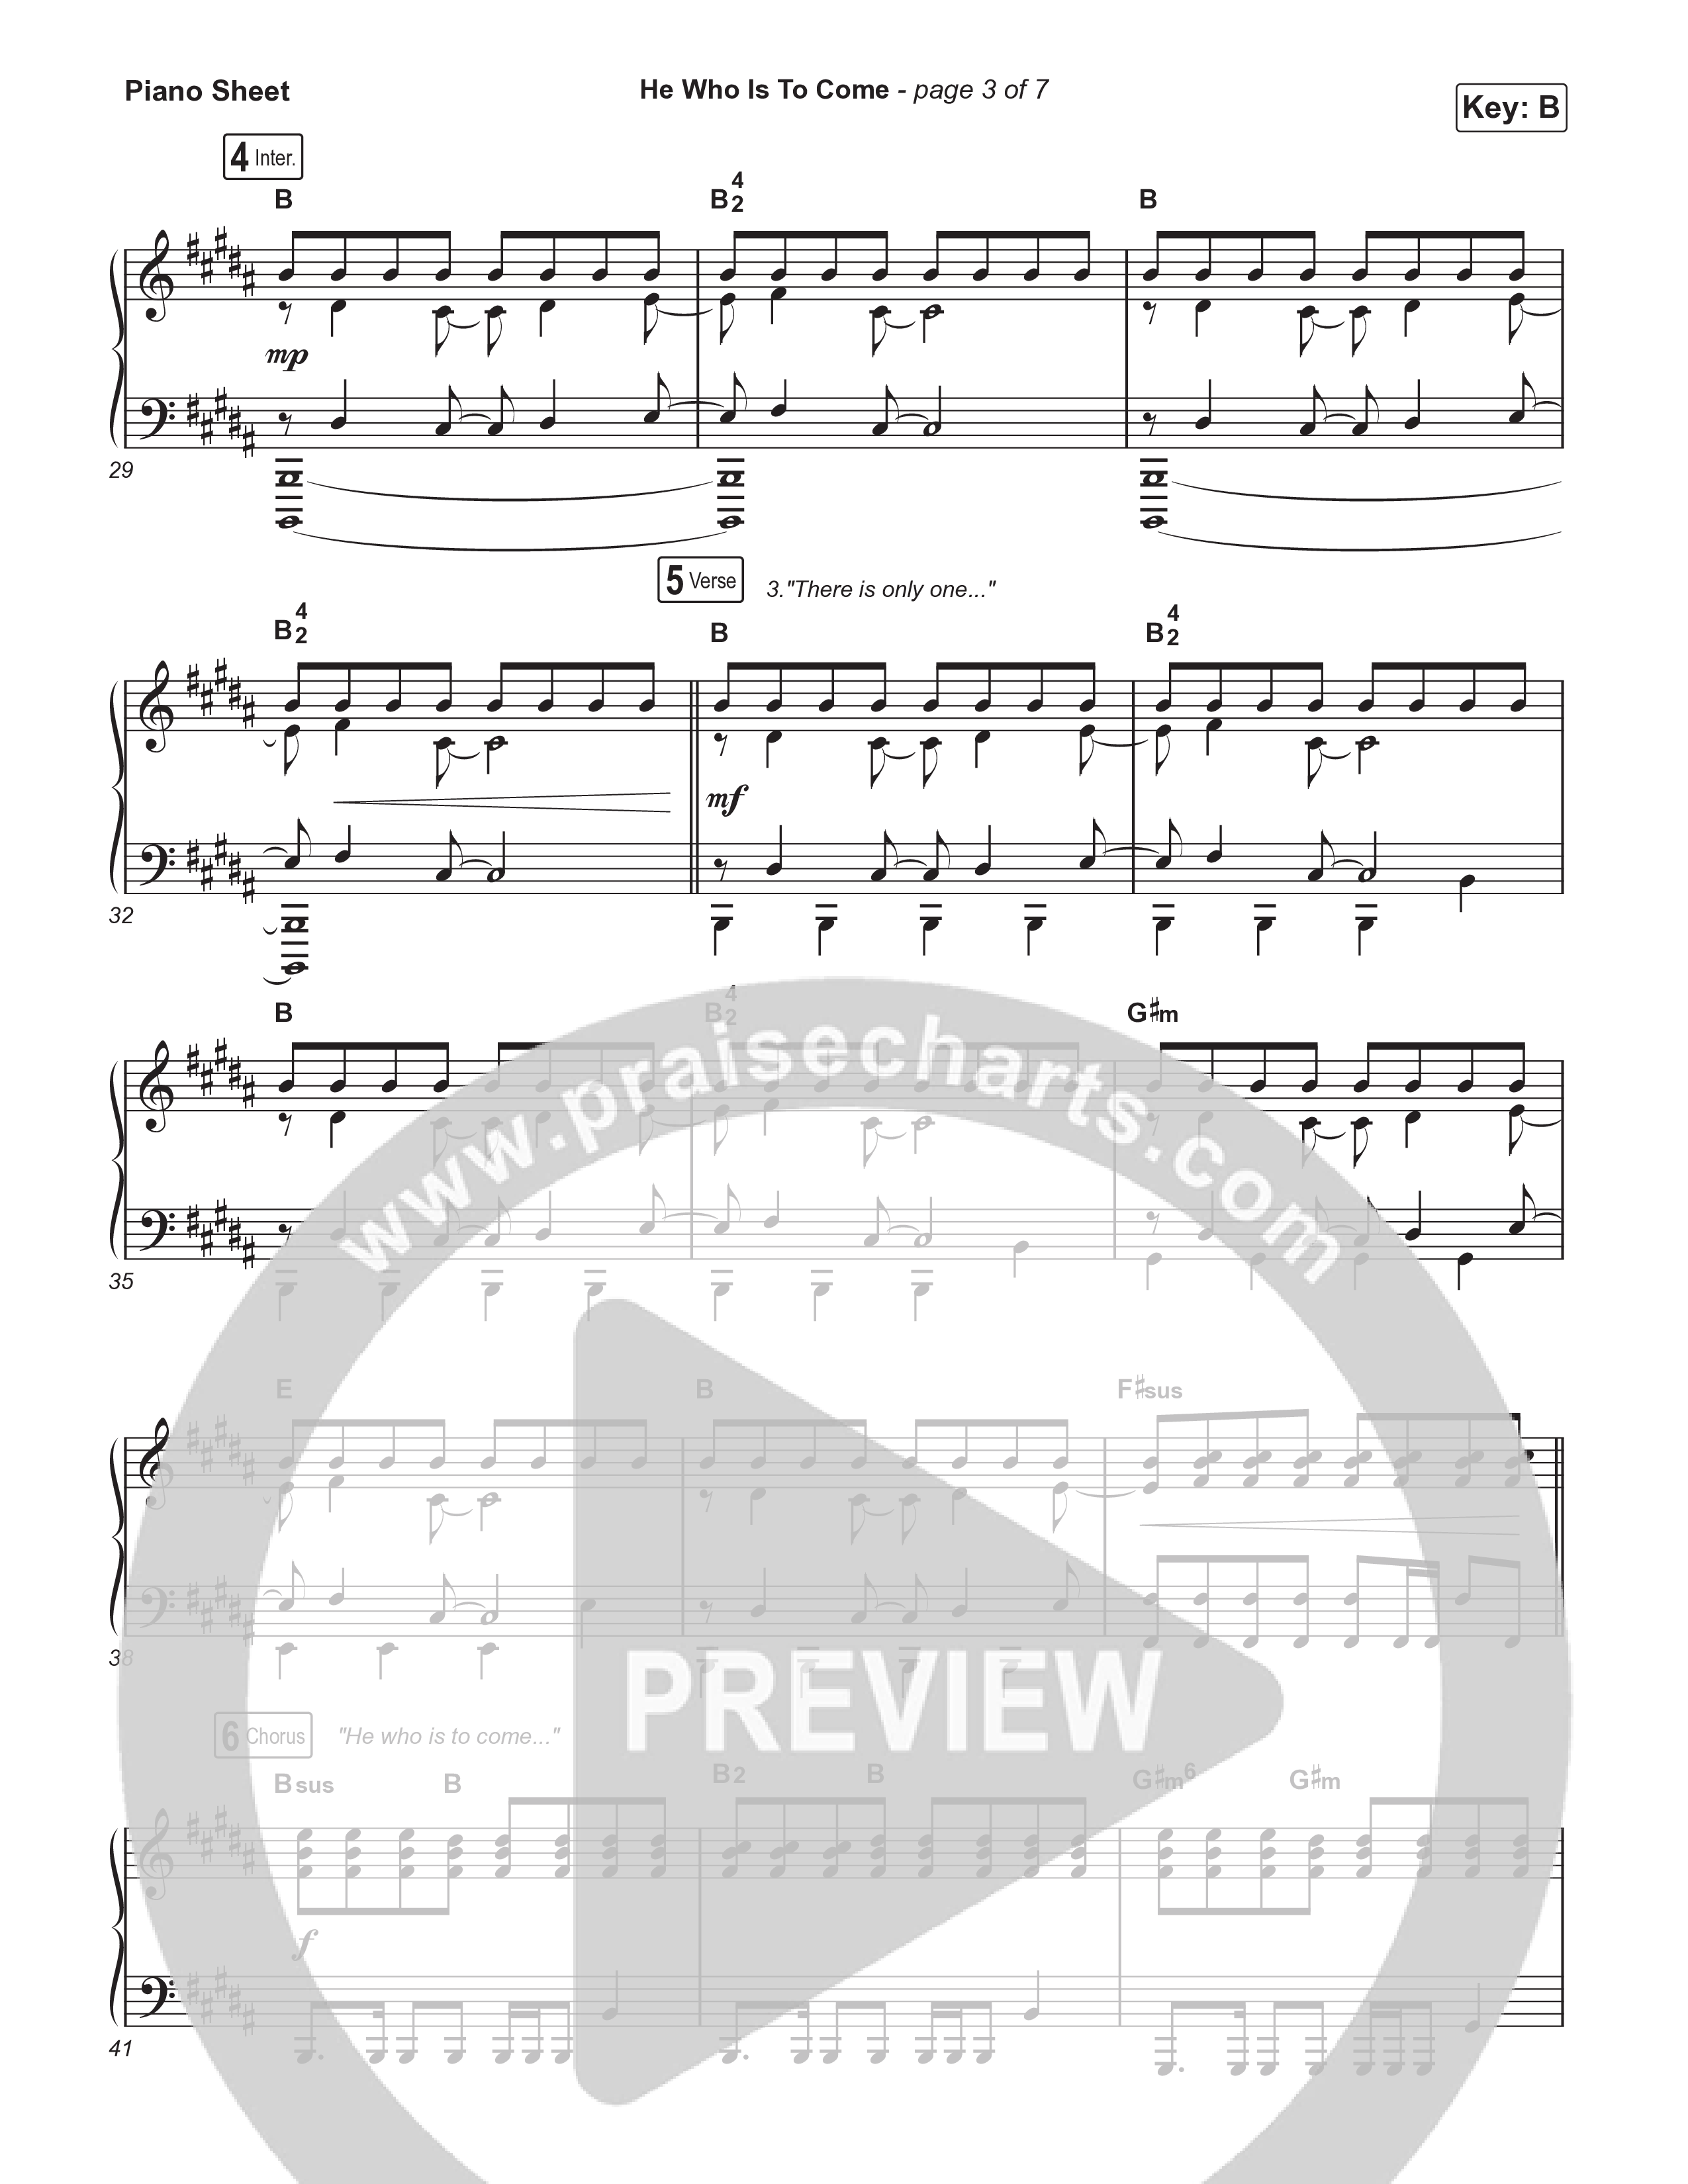 He Who Is To Come (Choral Anthem SATB) Piano Sheet (Passion / Cody Carnes / Kristian Stanfill / Arr. Luke Gambill)